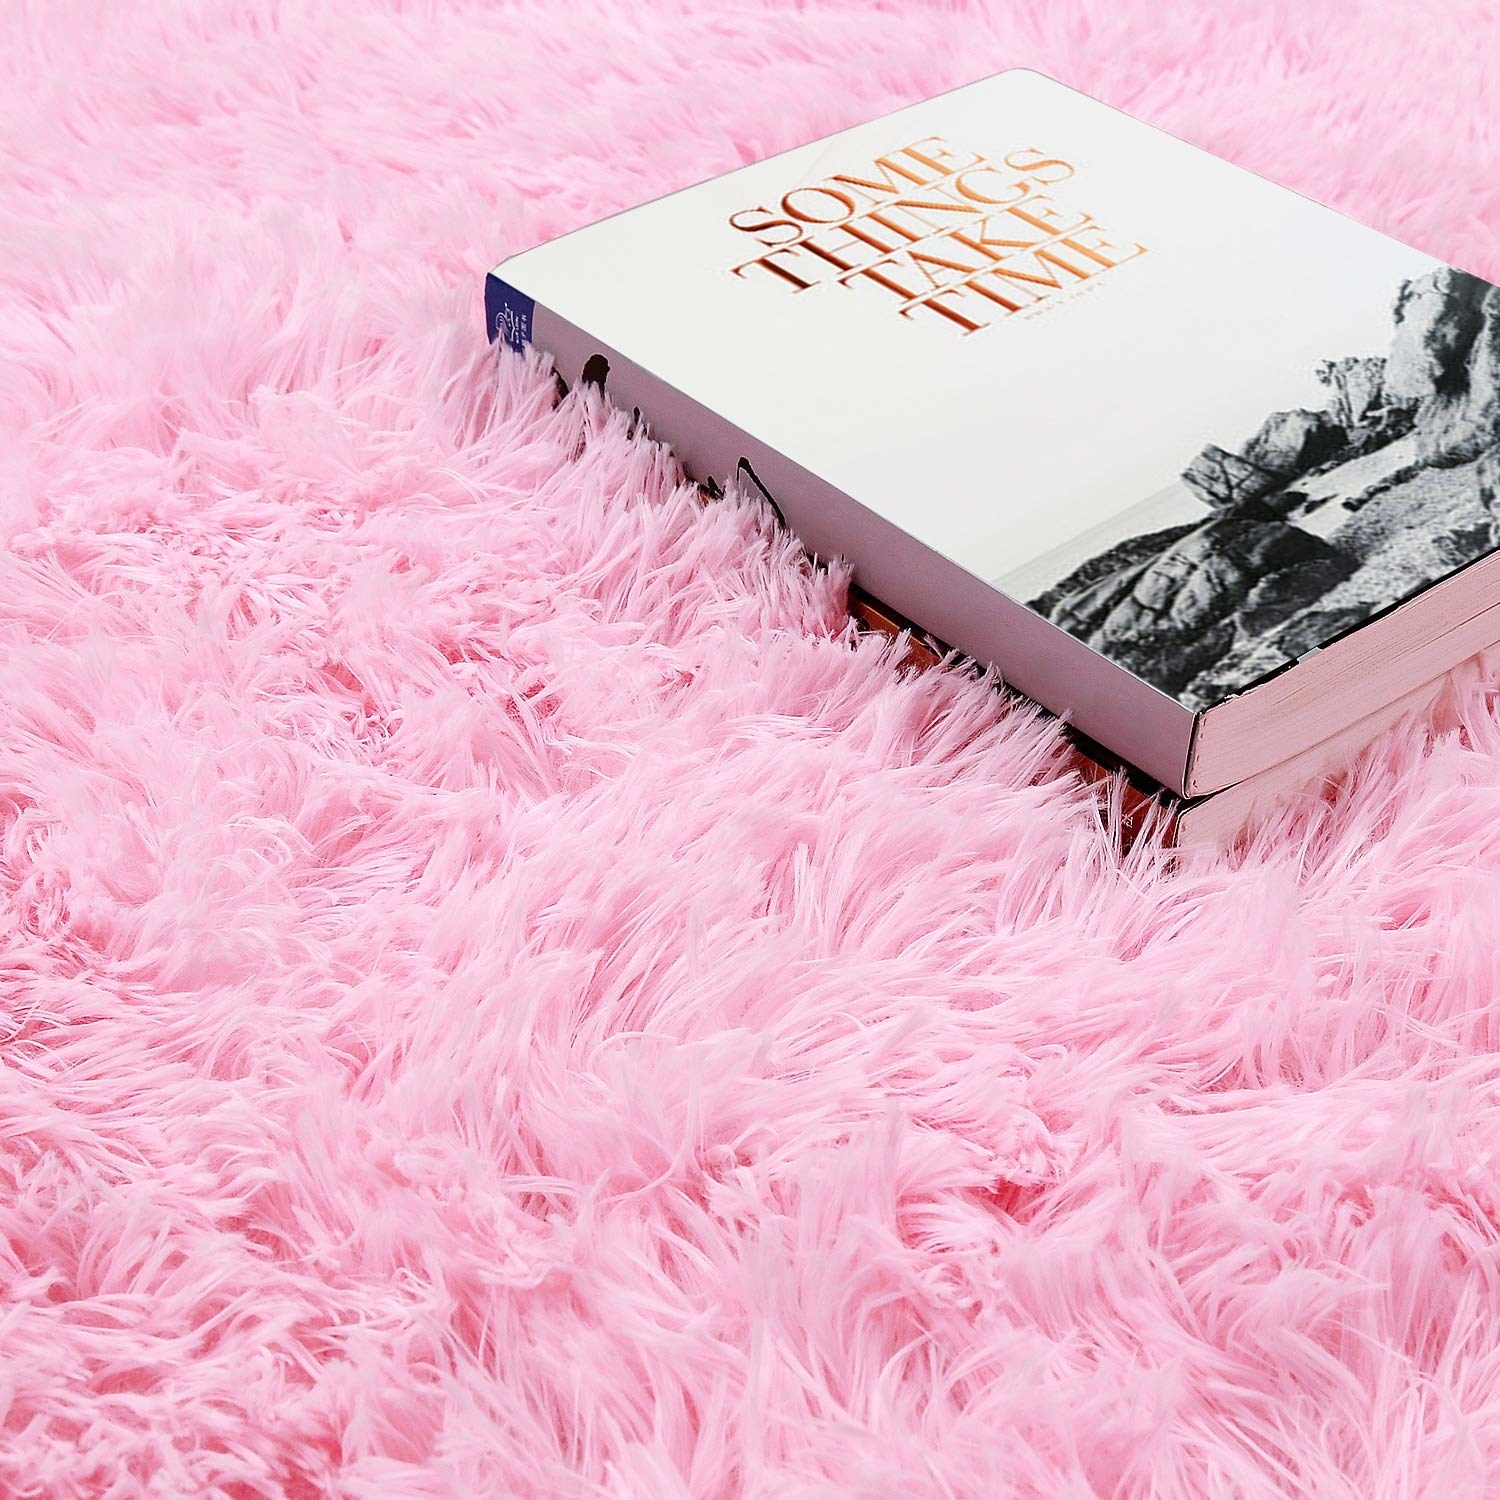 pink shag rug with a coffee table book on it